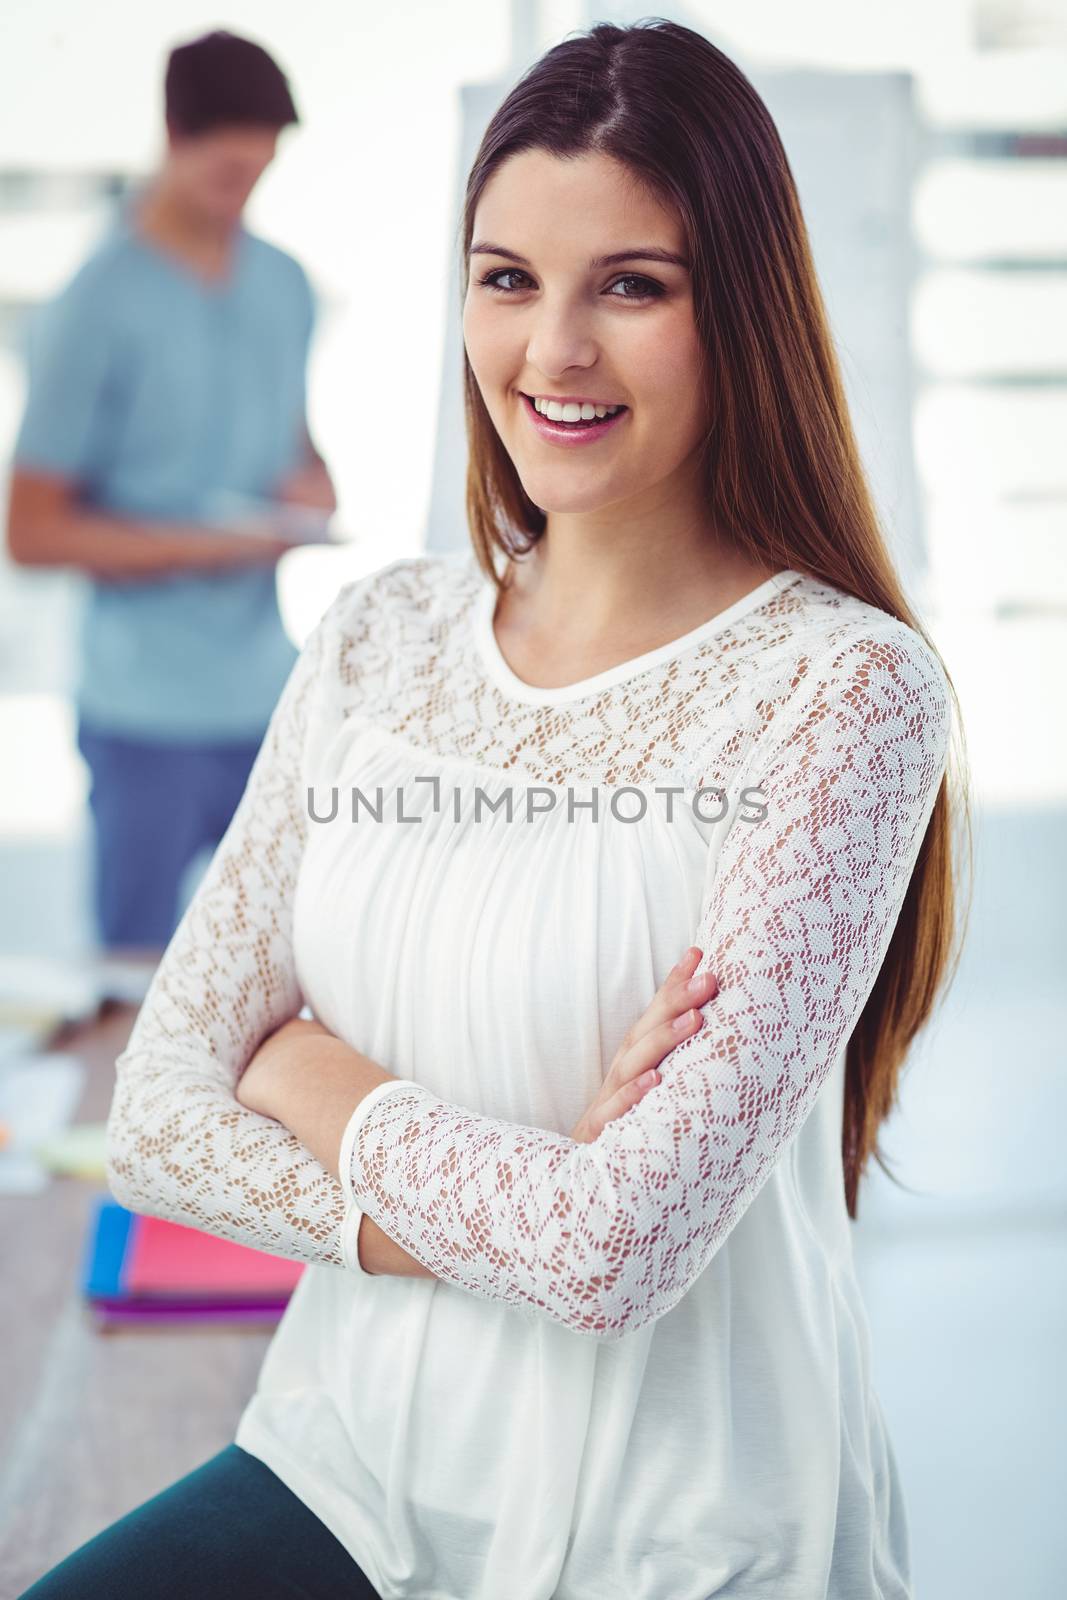 Young creative worker smiling at camera in casual office